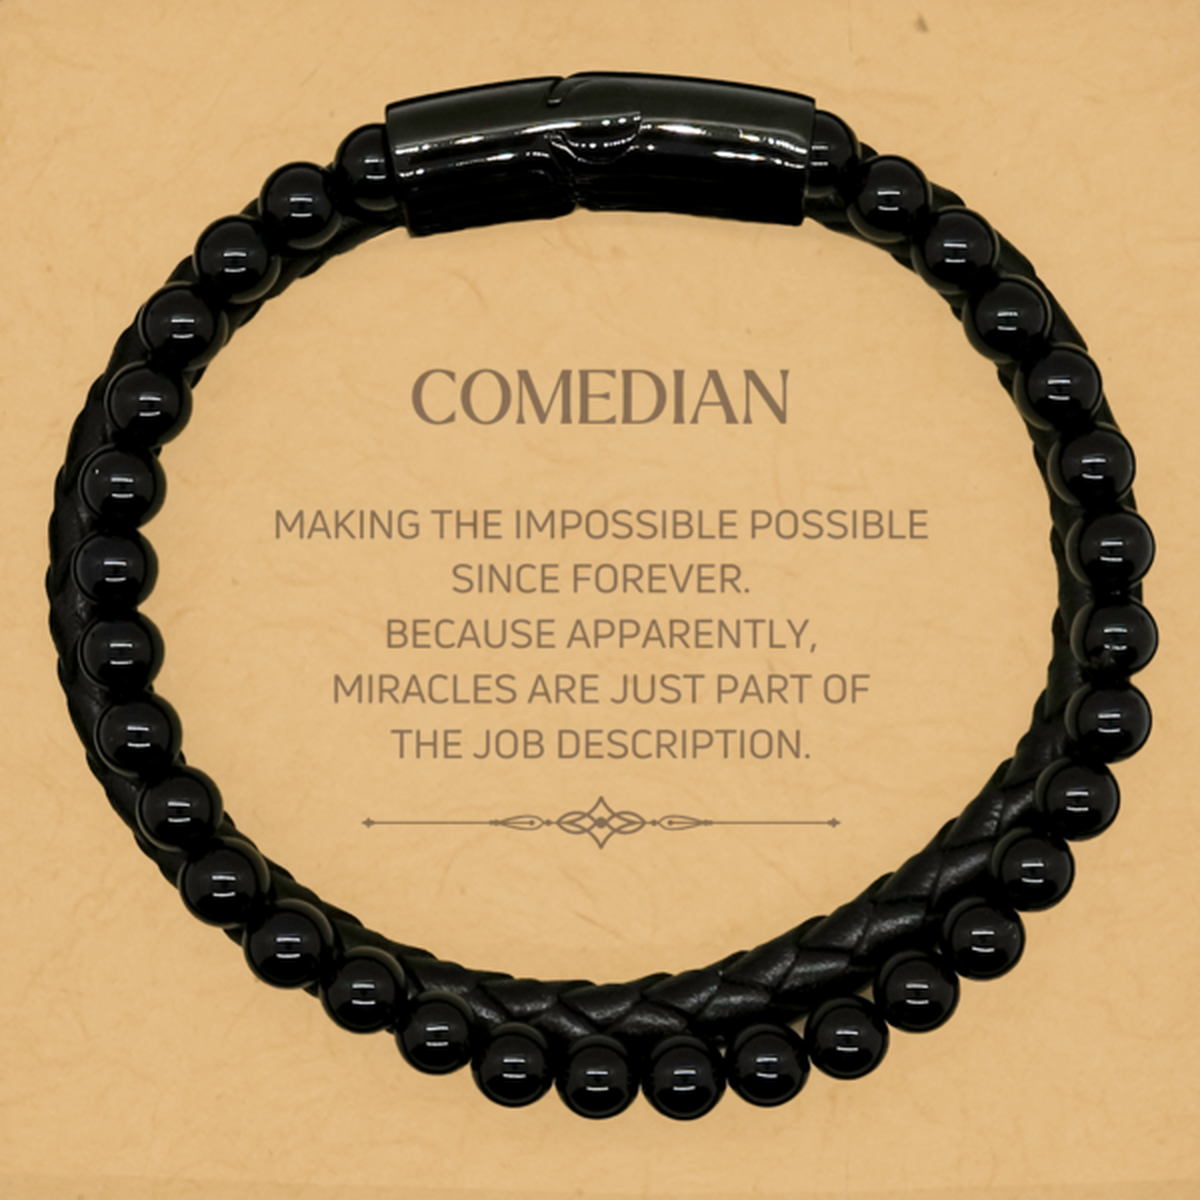 Funny Comedian Gifts, Miracles are just part of the job description, Inspirational Birthday Stone Leather Bracelets For Comedian, Men, Women, Coworkers, Friends, Boss